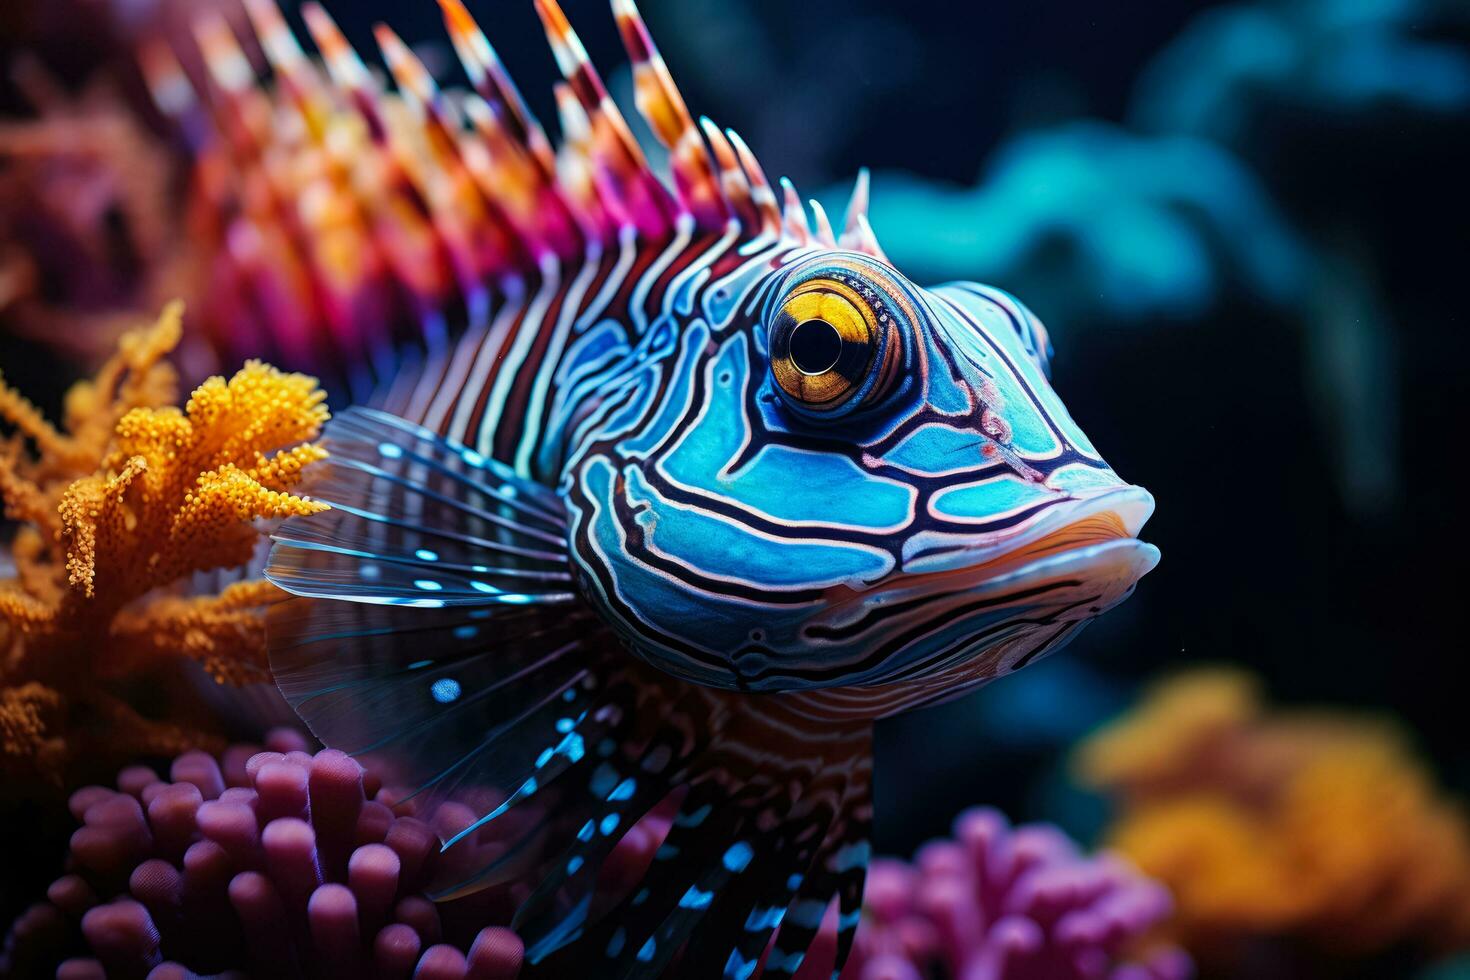 Stunning close ups highlighting vibrant colors and textures of coral reefs underwater photo